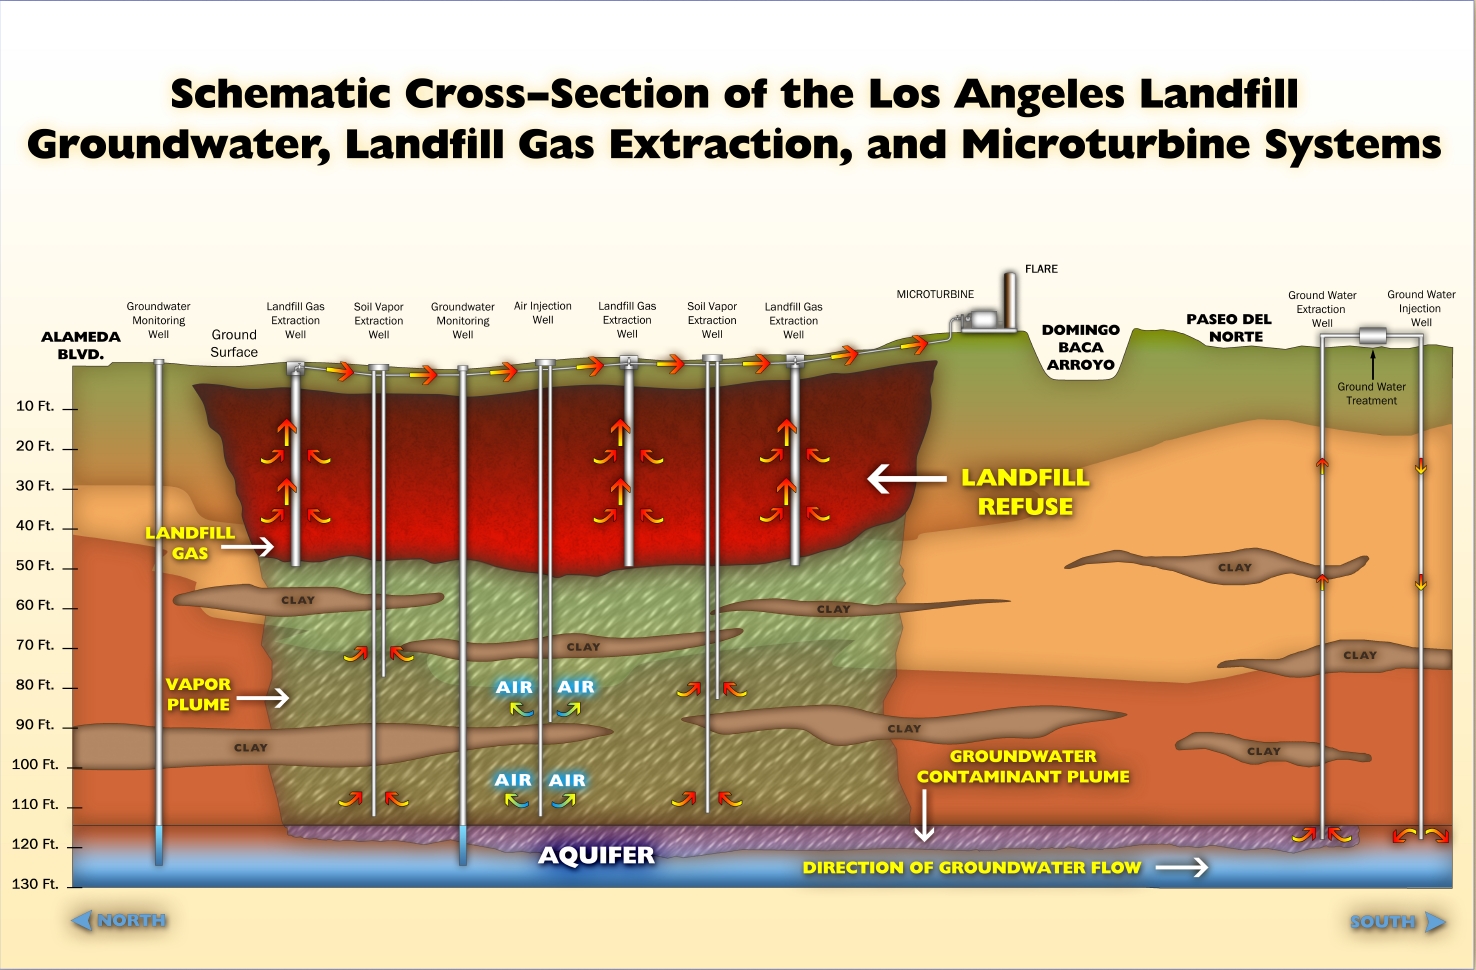 caption:Schematic Cross-Section of the Los Angeles Landfill